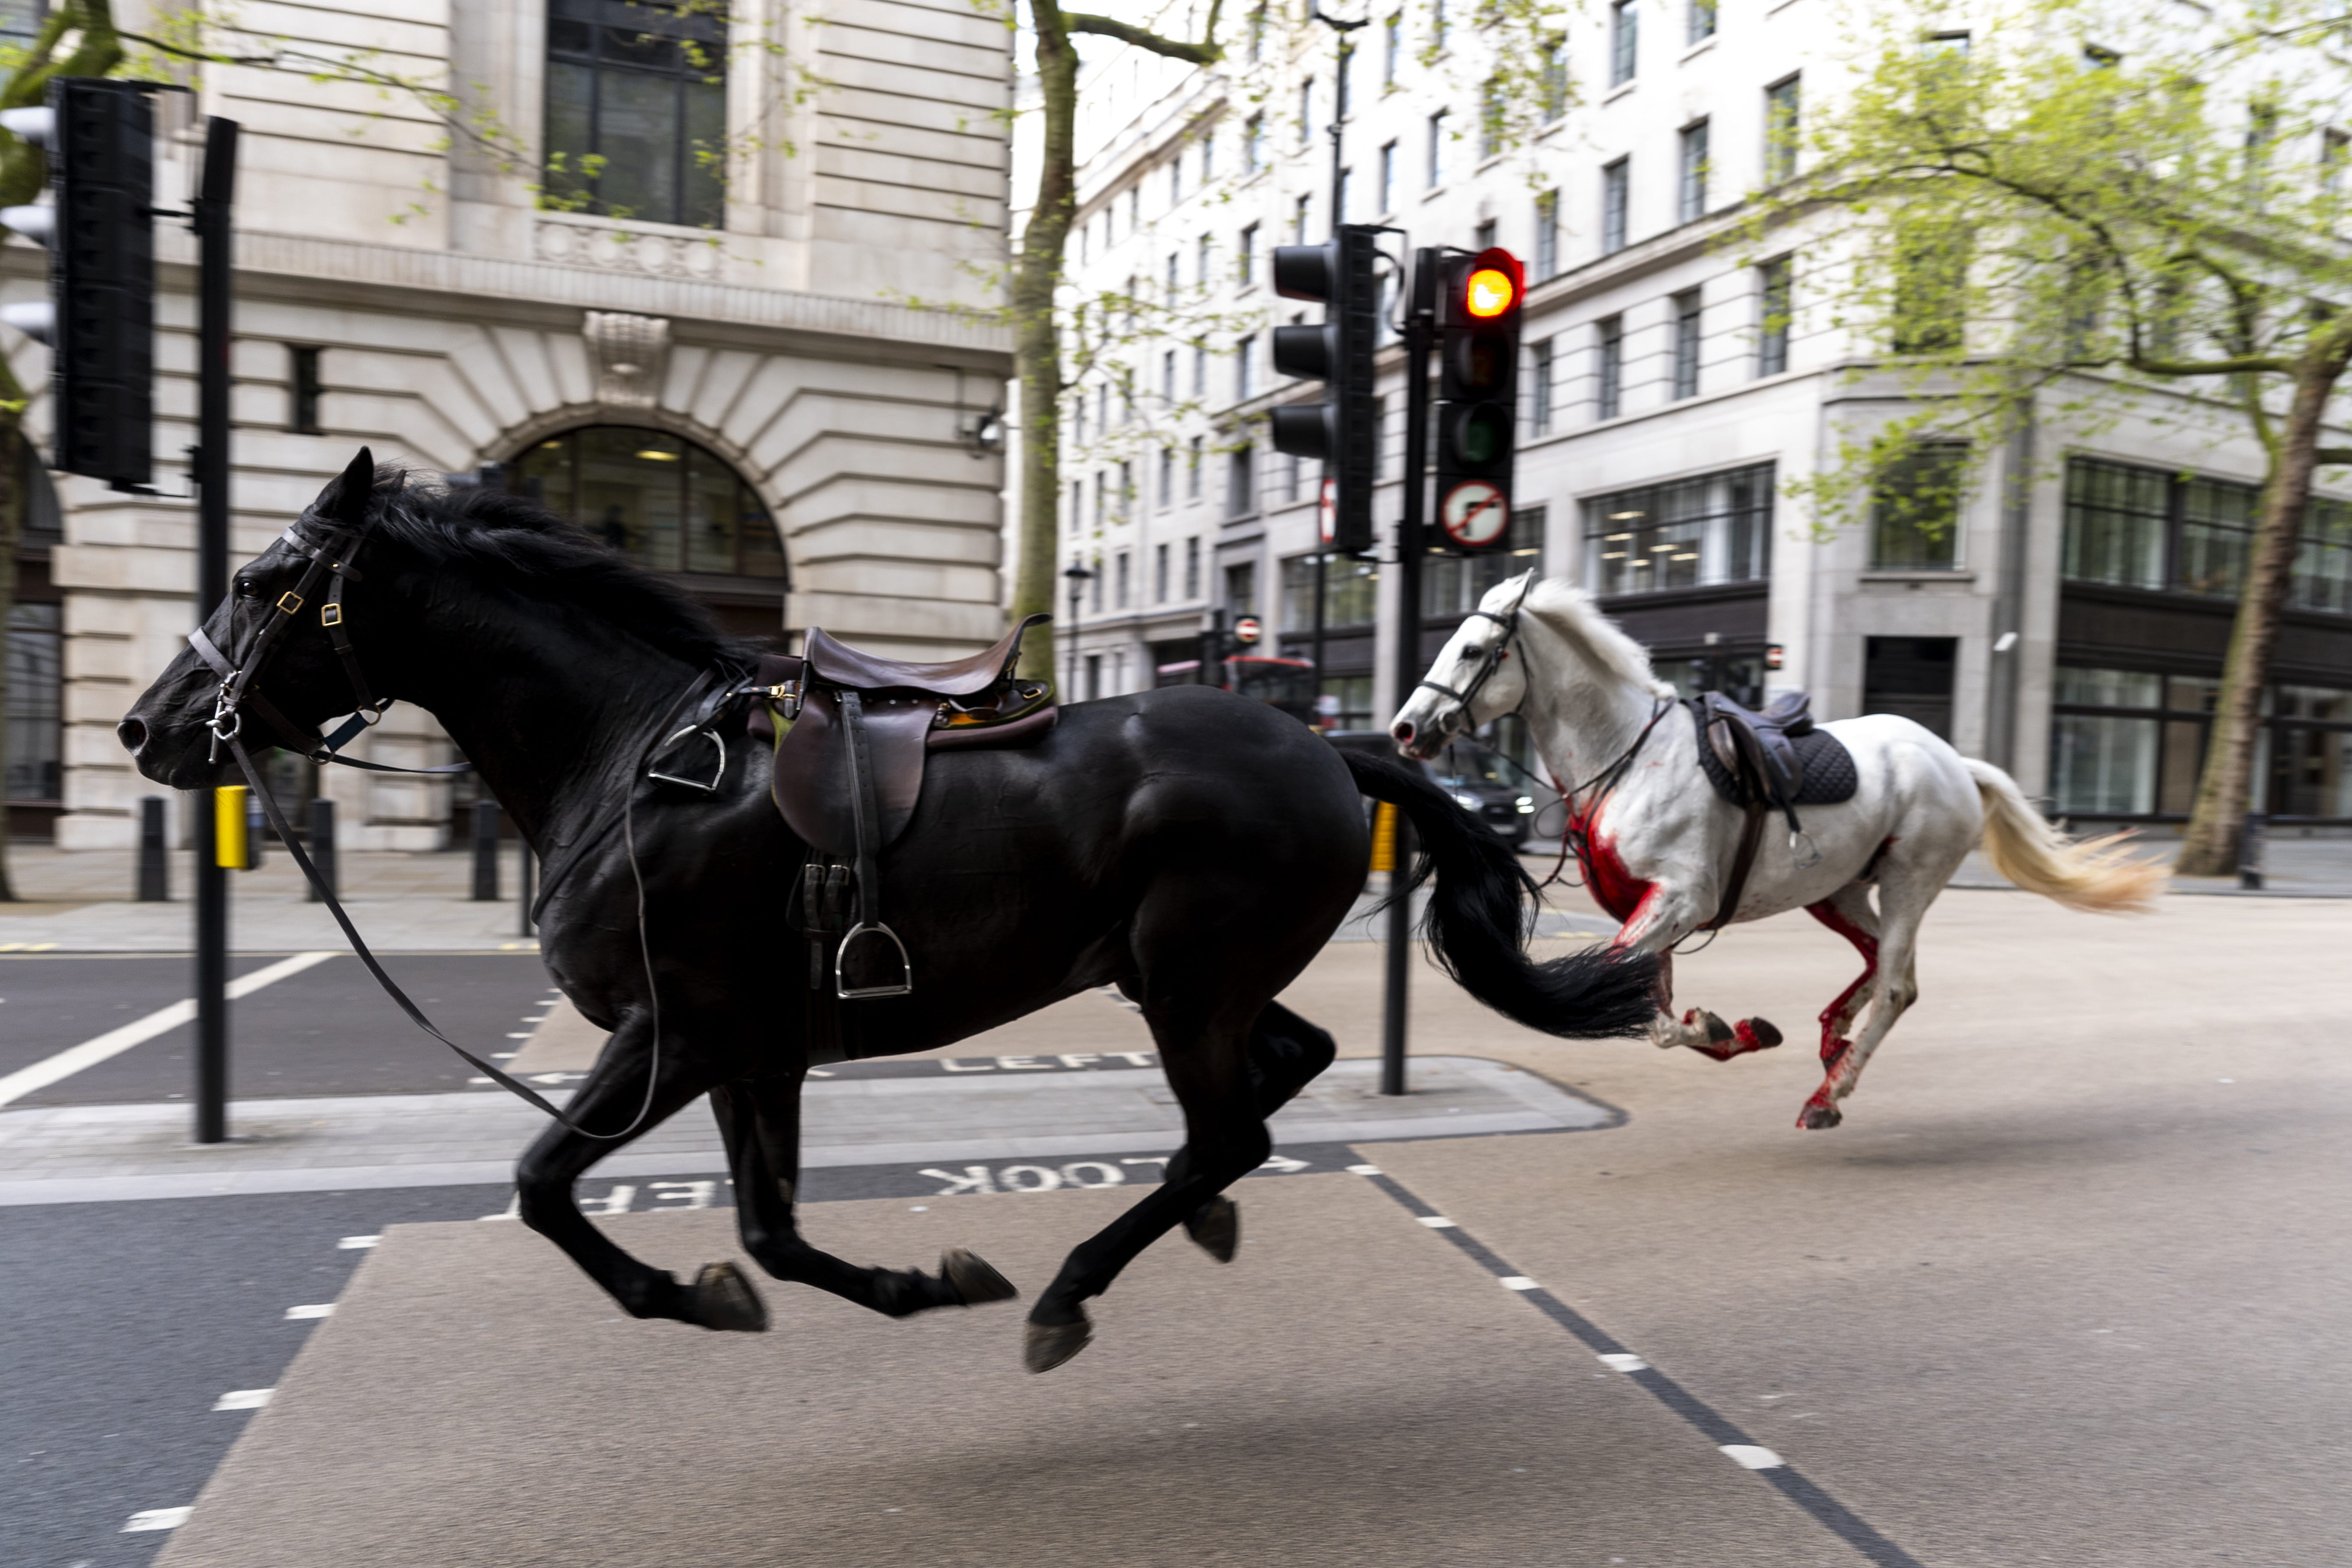 One of the horses was covered in blood as two of the animals galloped in the road near Aldwych